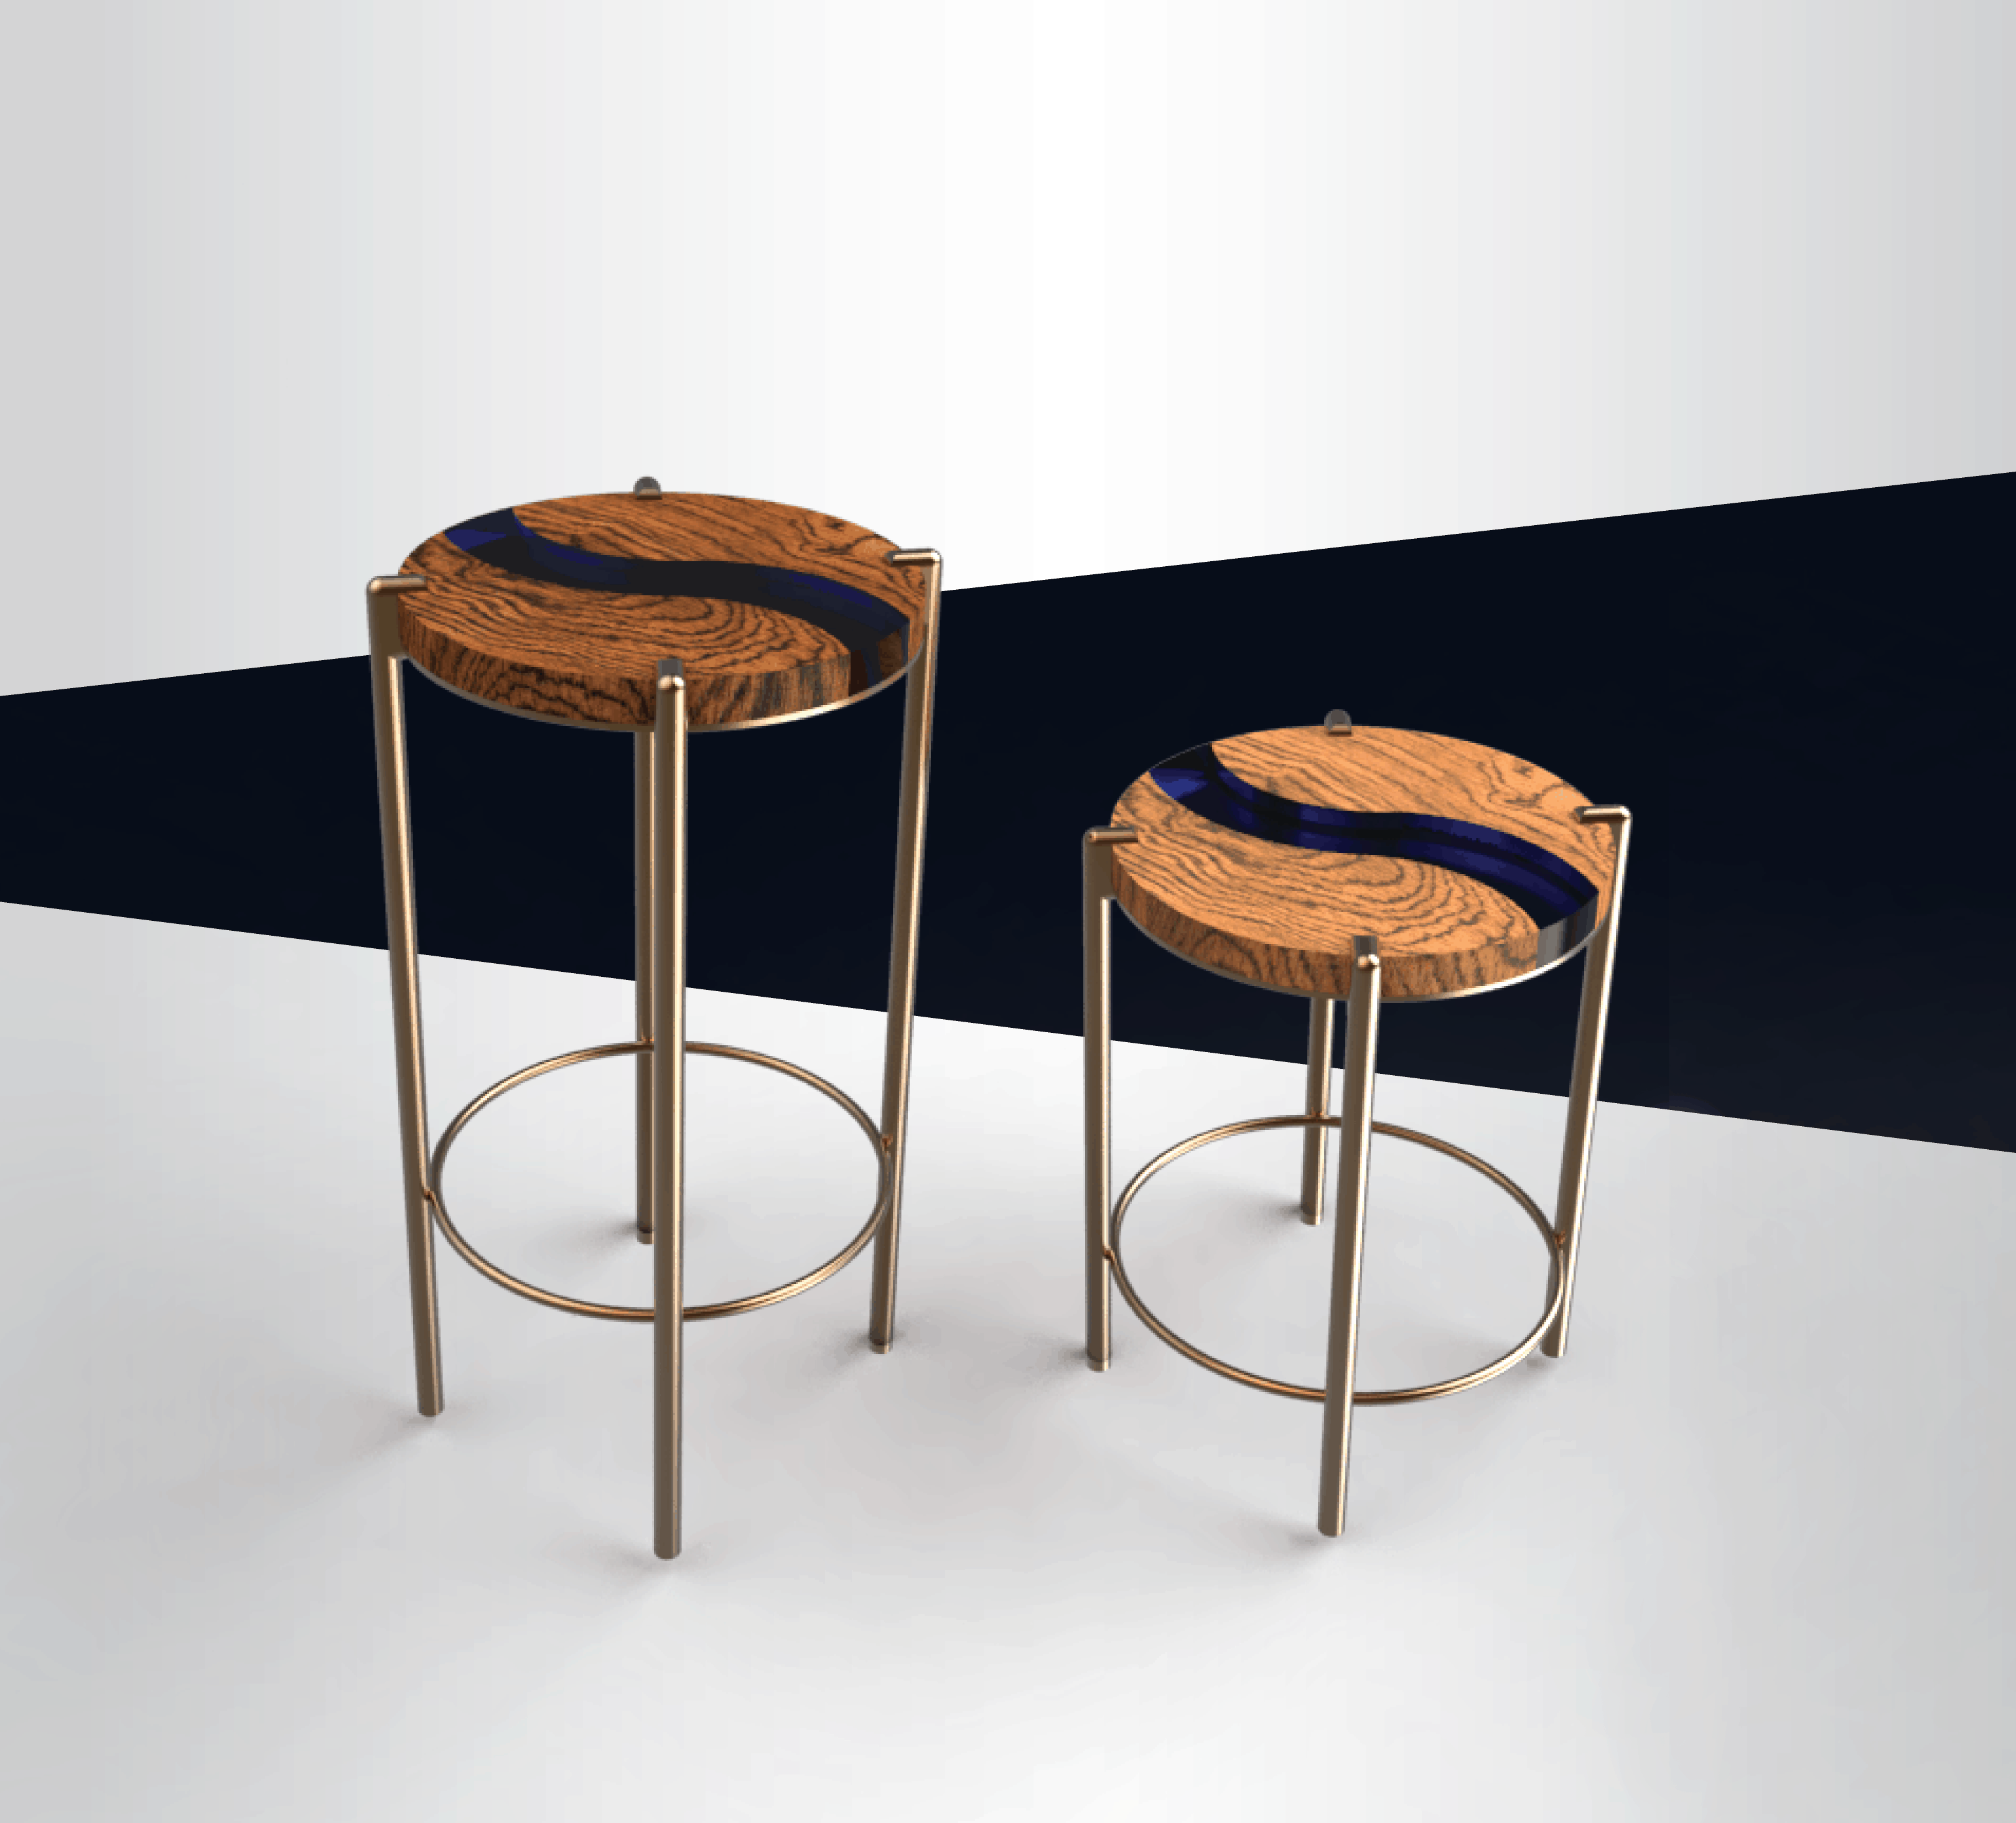 Fluctus Stool - with Nature Harmony